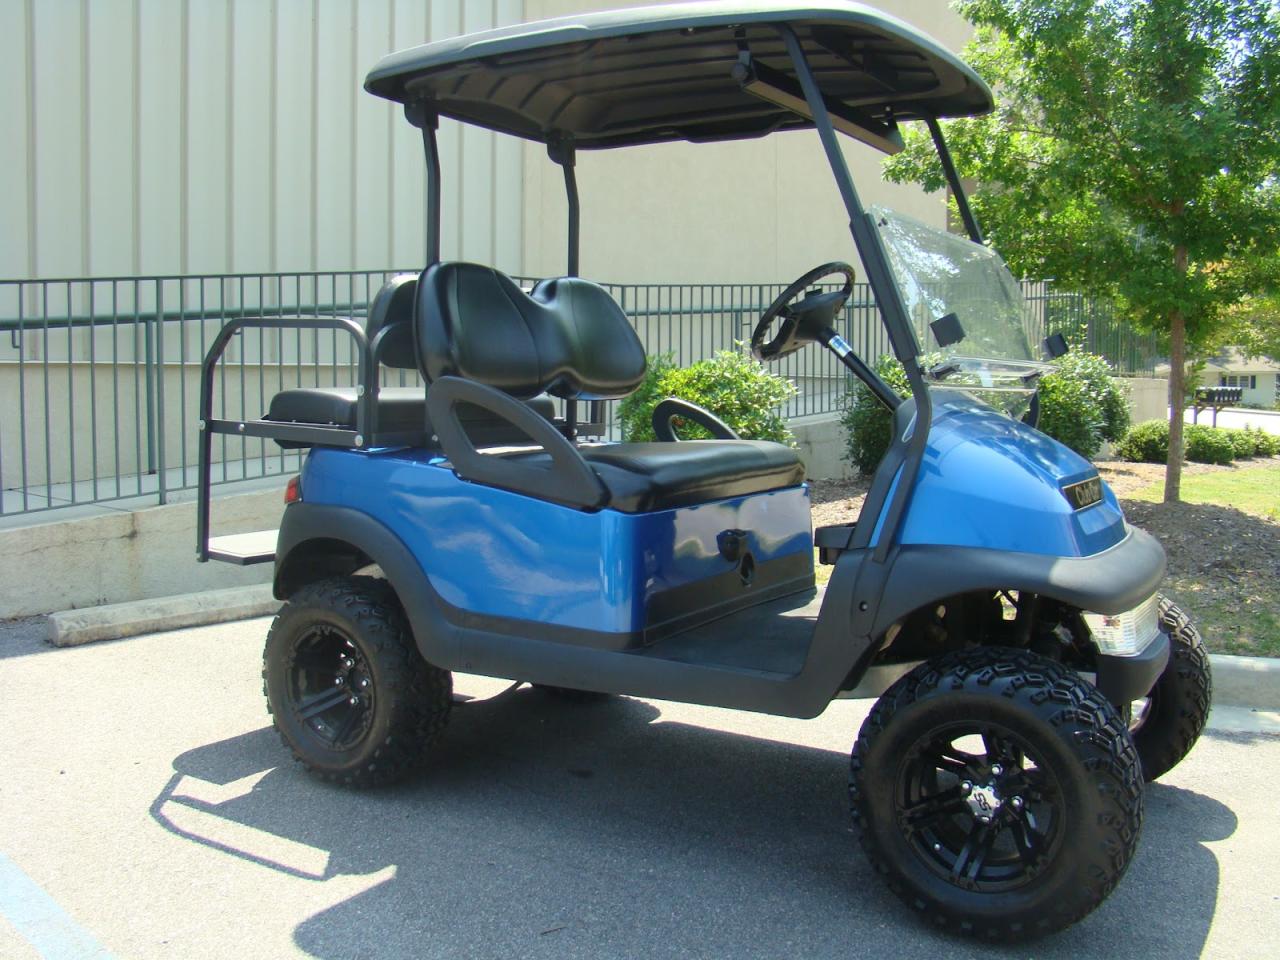 Used Golf Carts for Sale by Owner in Perry, Ohio: Find Your Perfect Ride